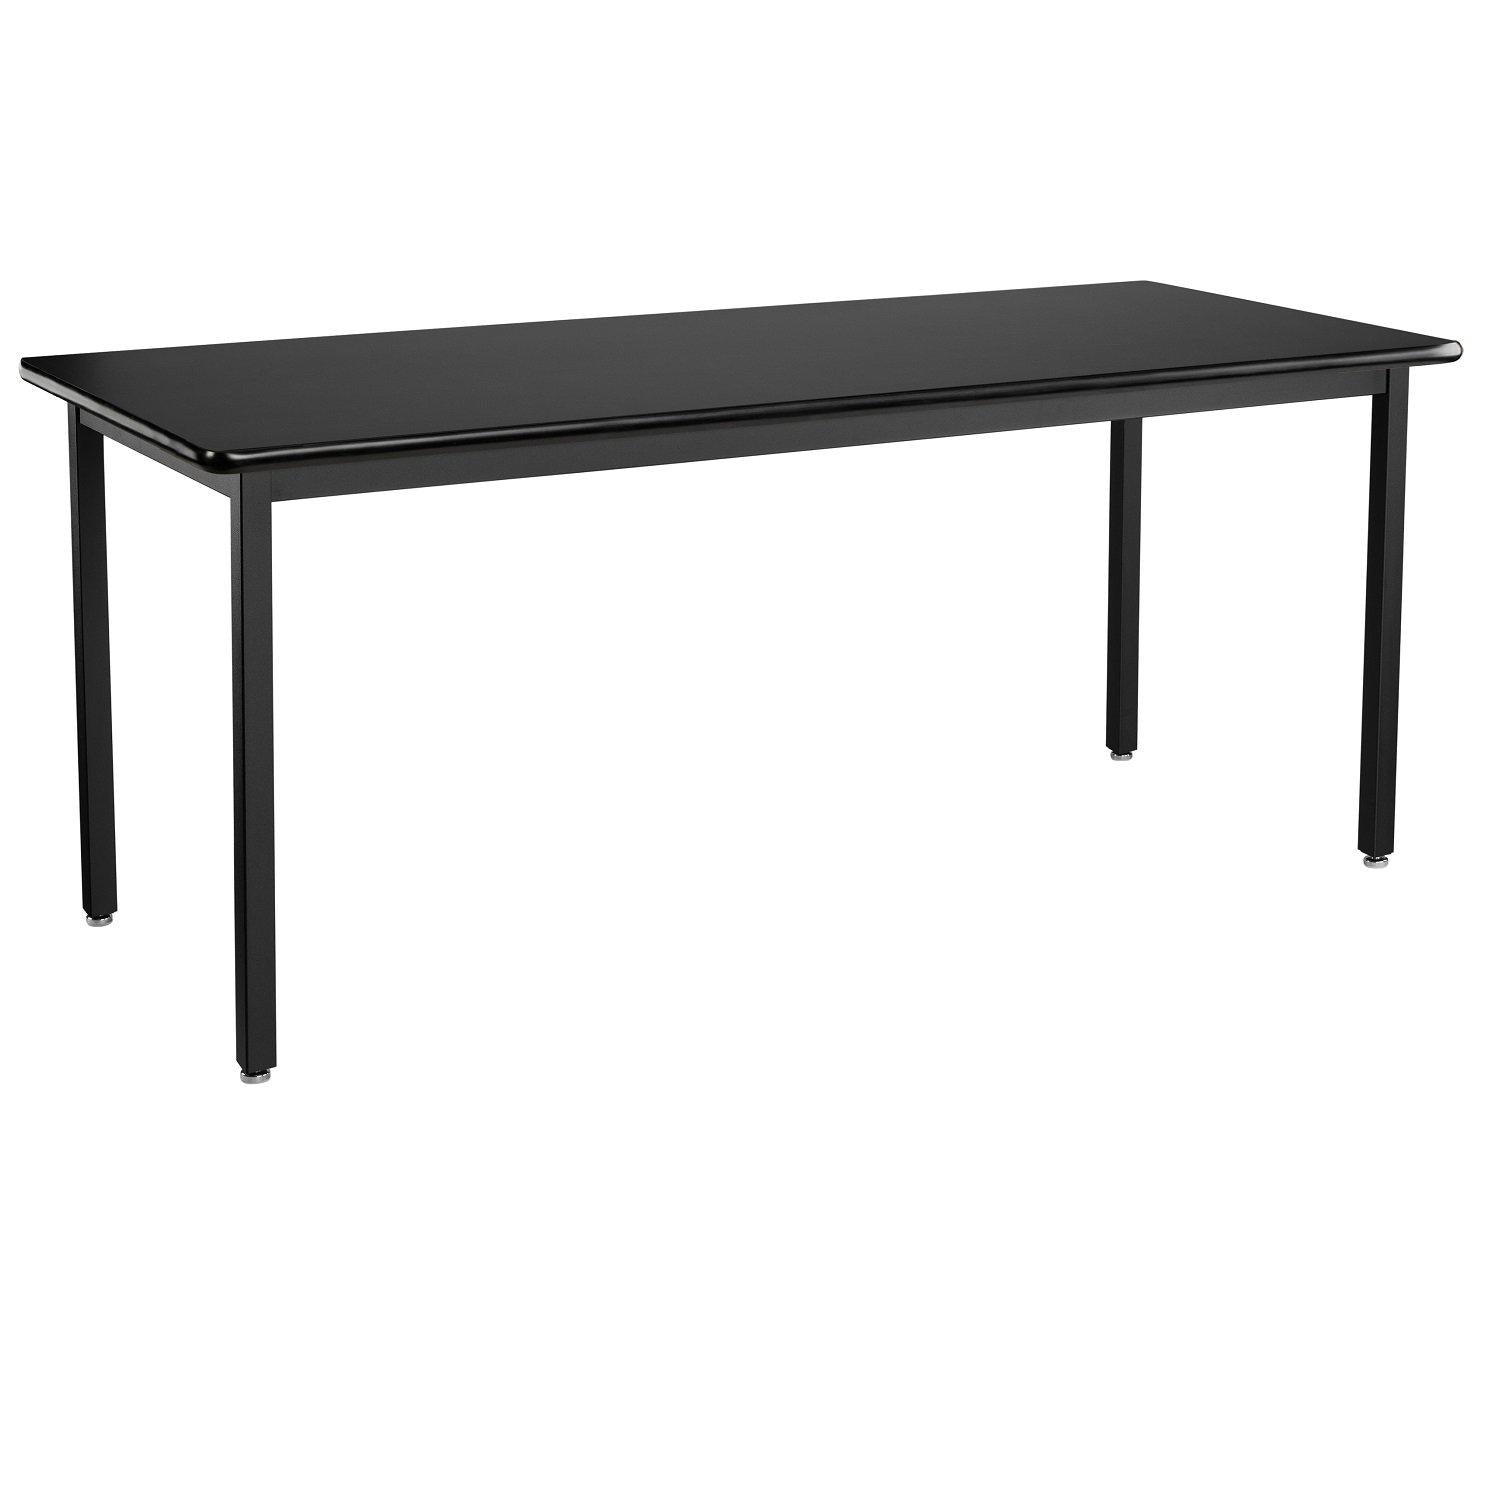 Heavy-Duty Fixed Height Utility Table, Black Frame, 30" x 96", High-Pressure Laminate Top with T-Mold Edge